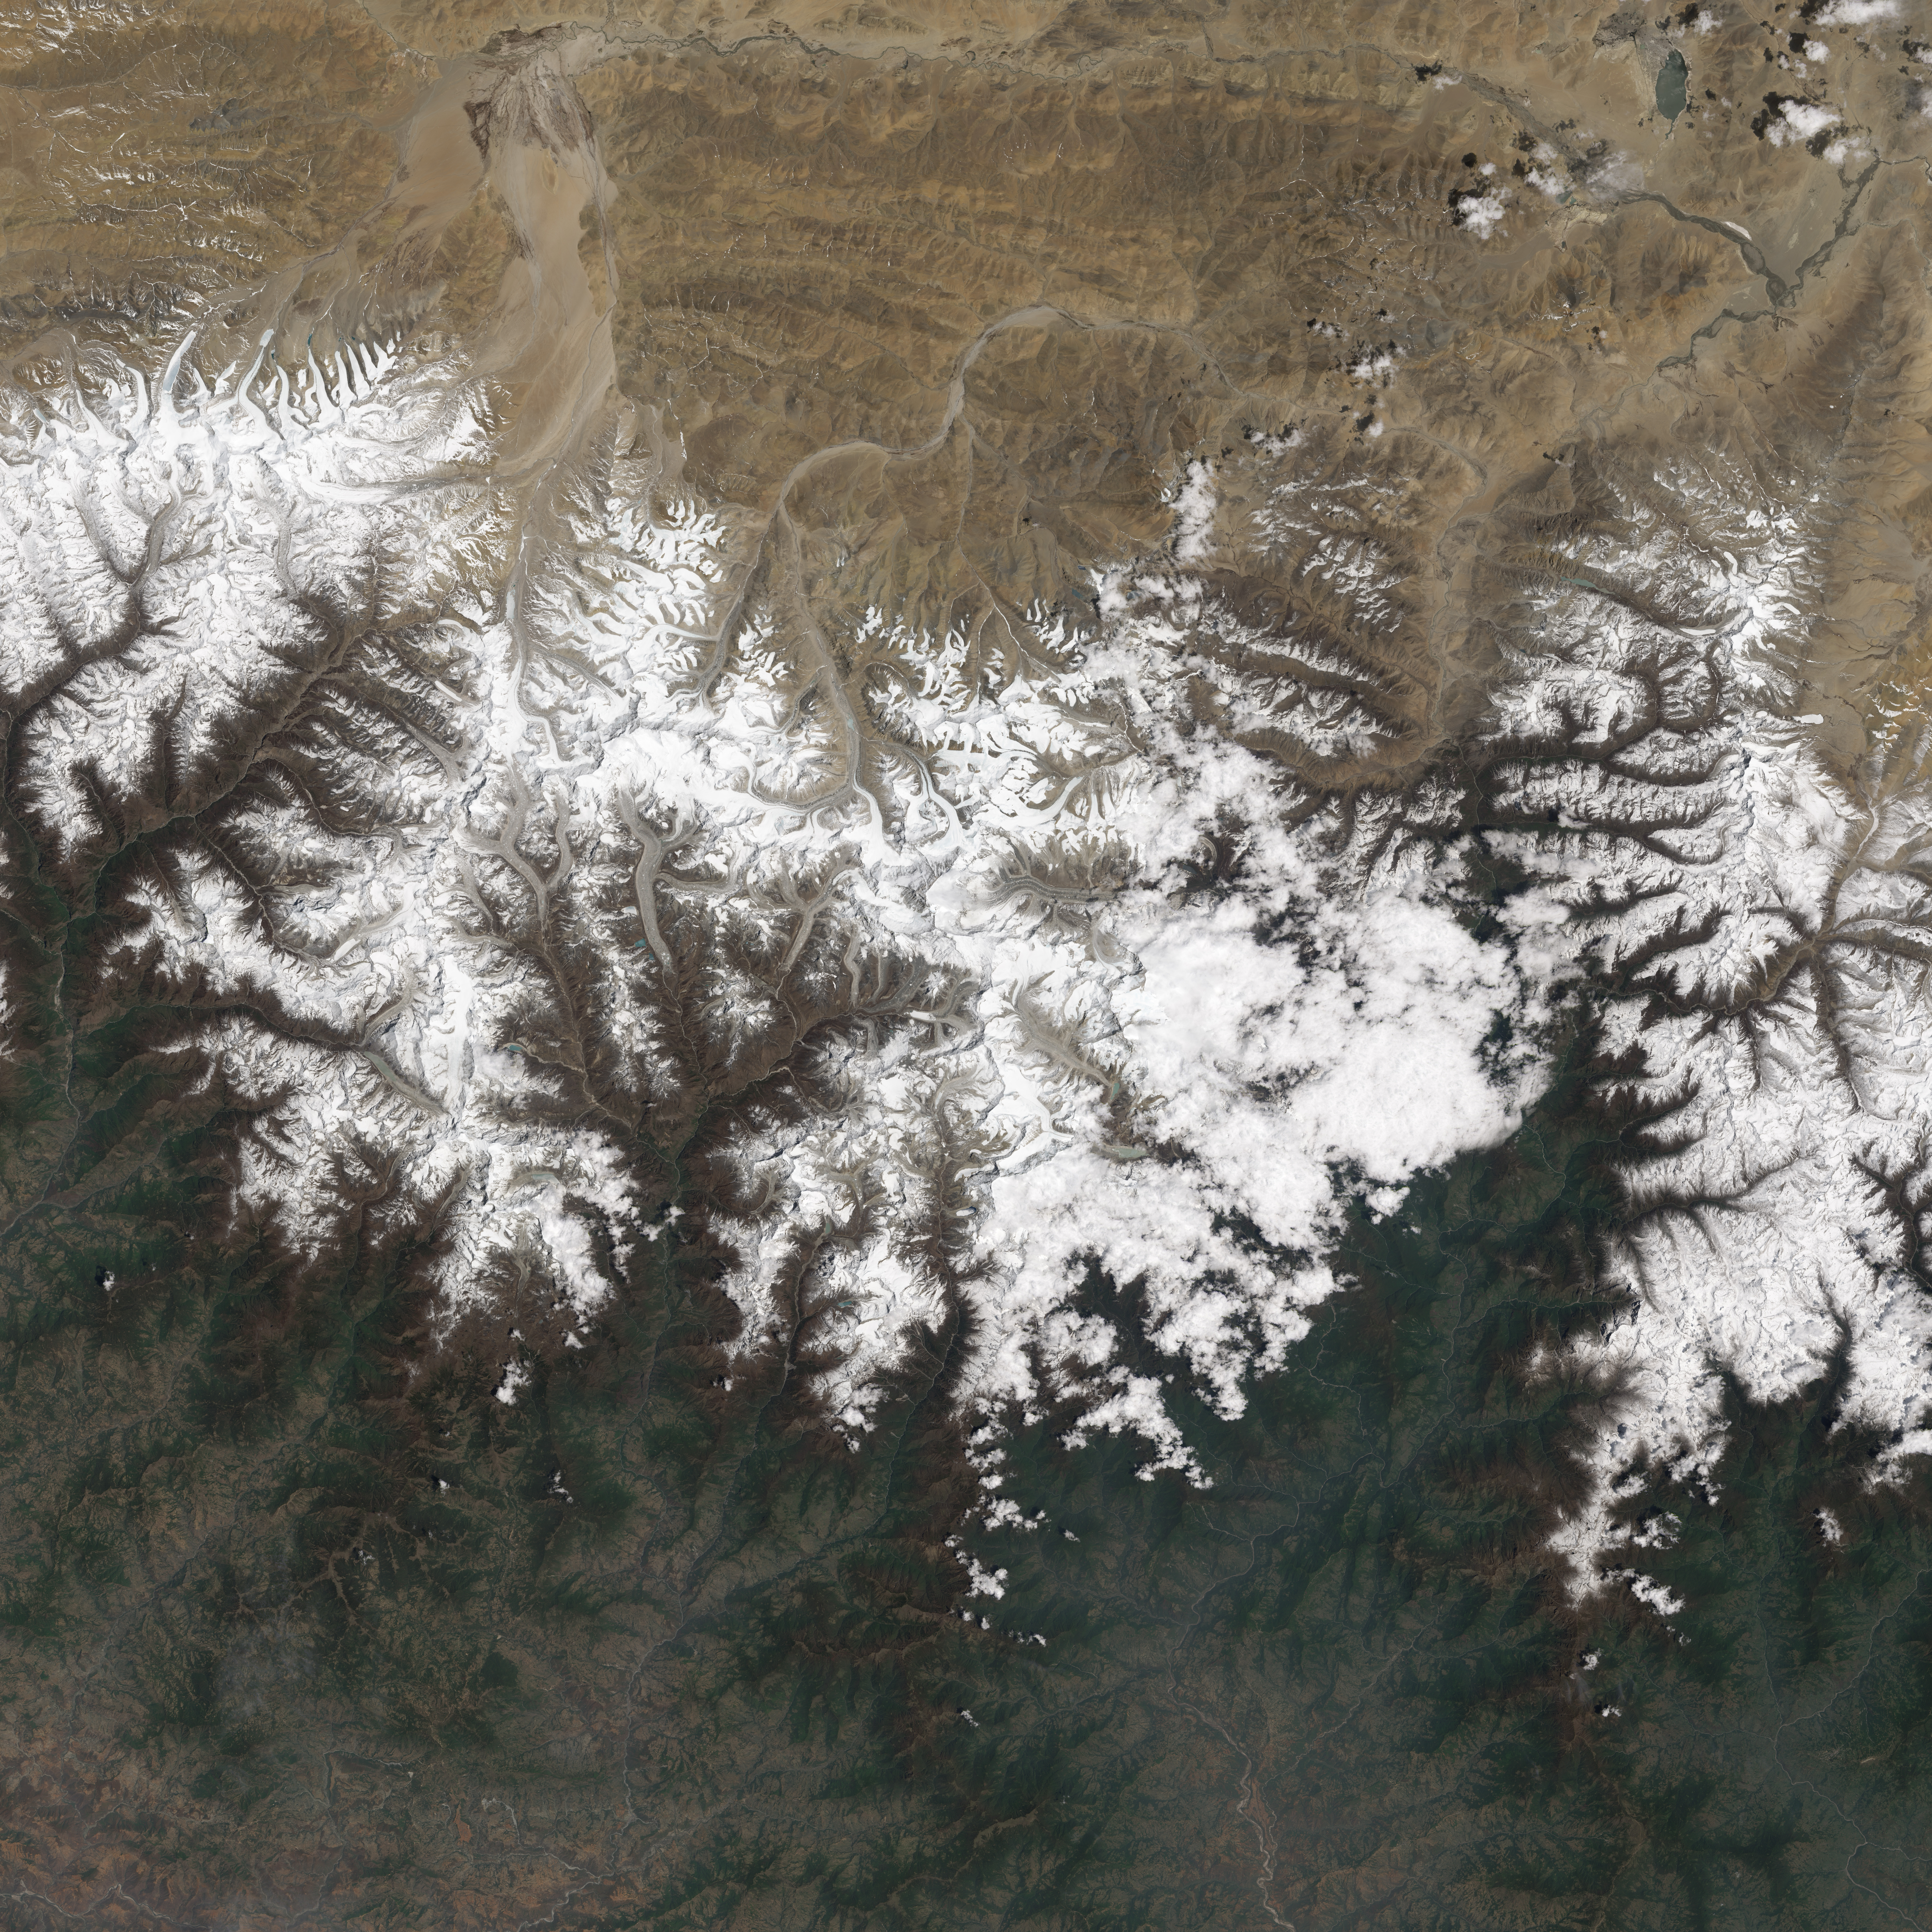 Everest Region, Nepal and China - related image preview